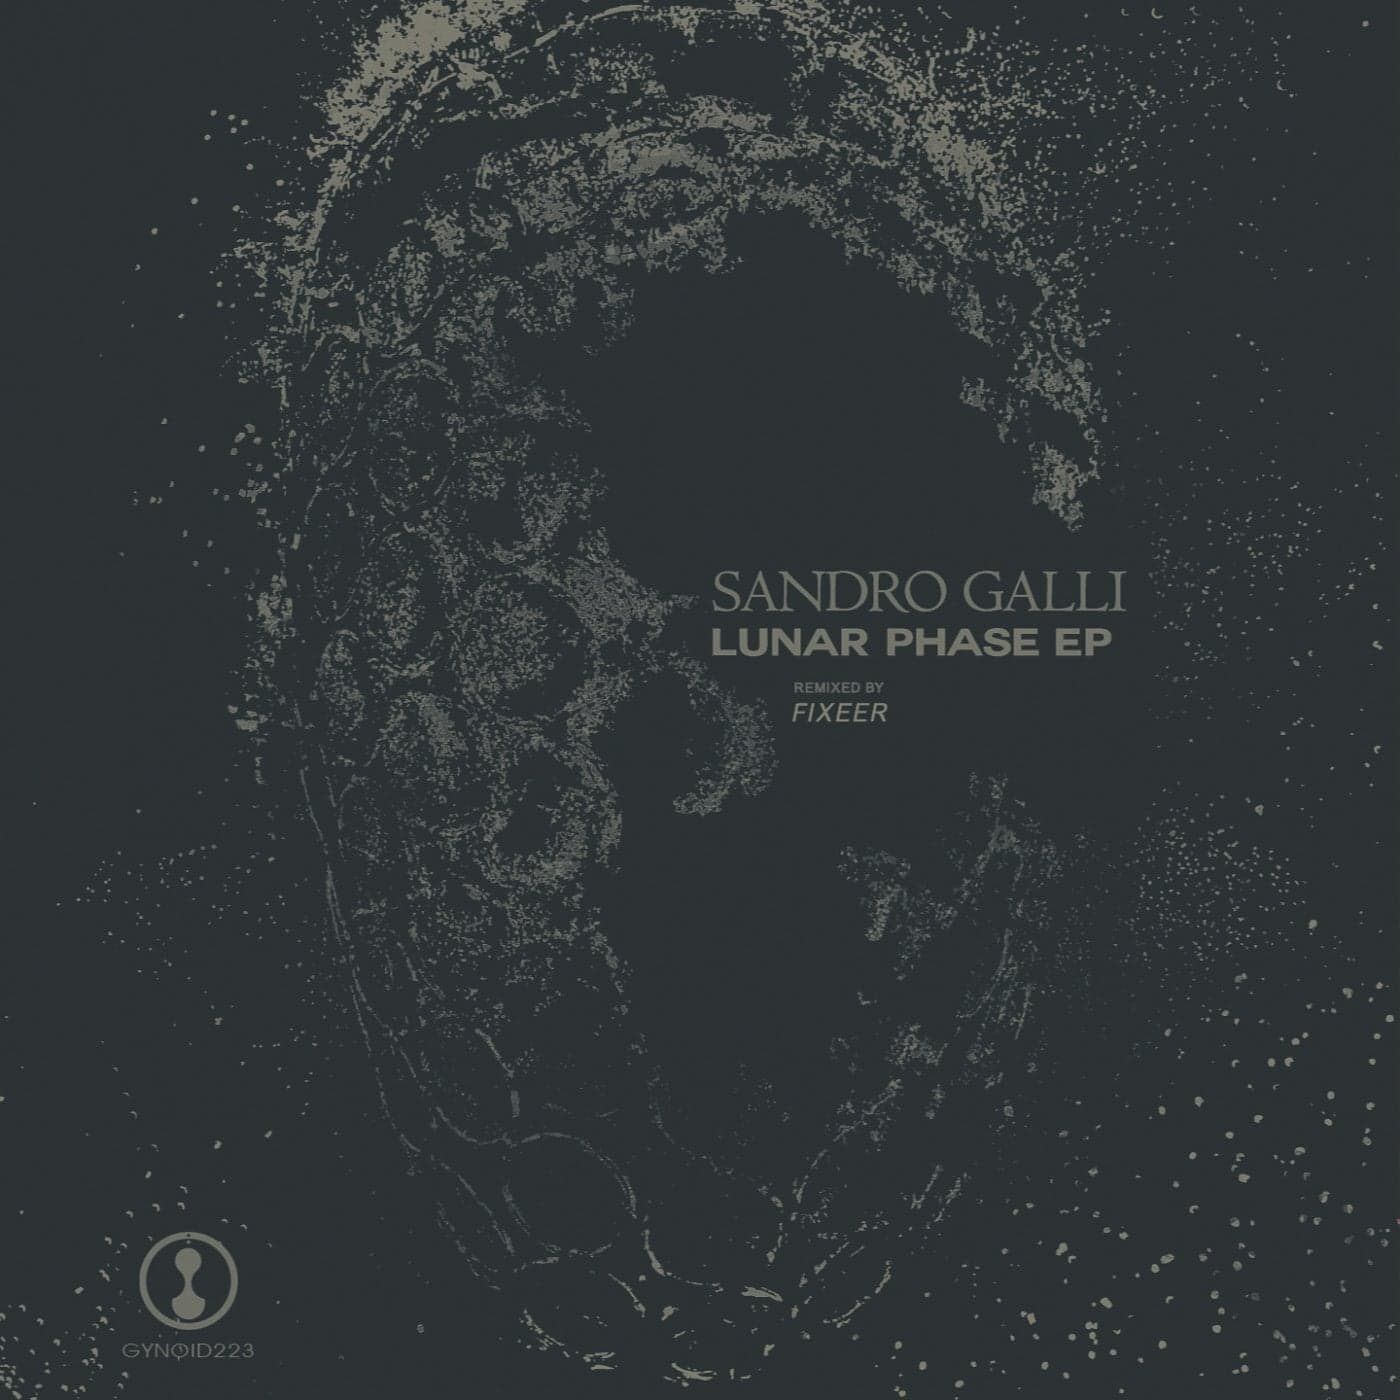 image cover: Sandro Galli - Lunar Phase EP / GYNOID223